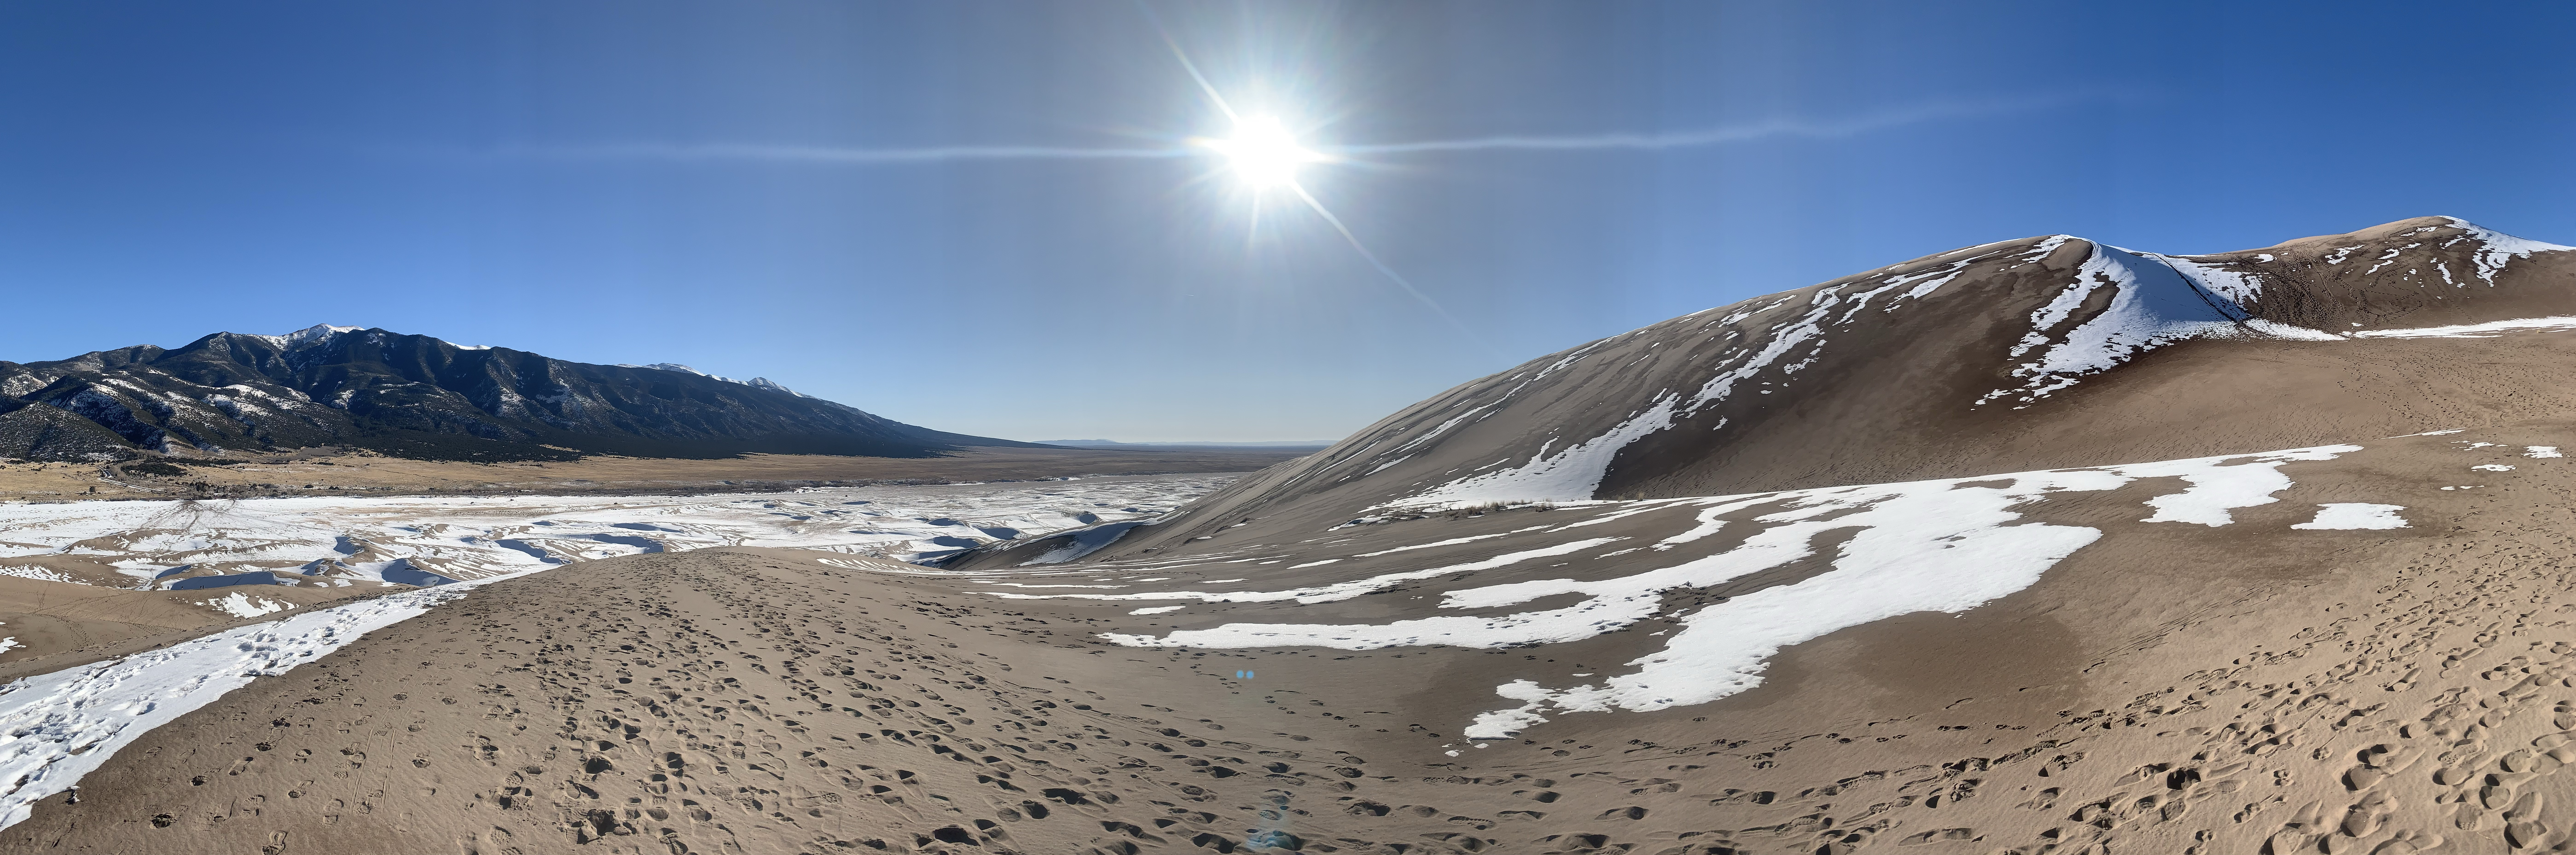 Panorama of the Sand Dunes